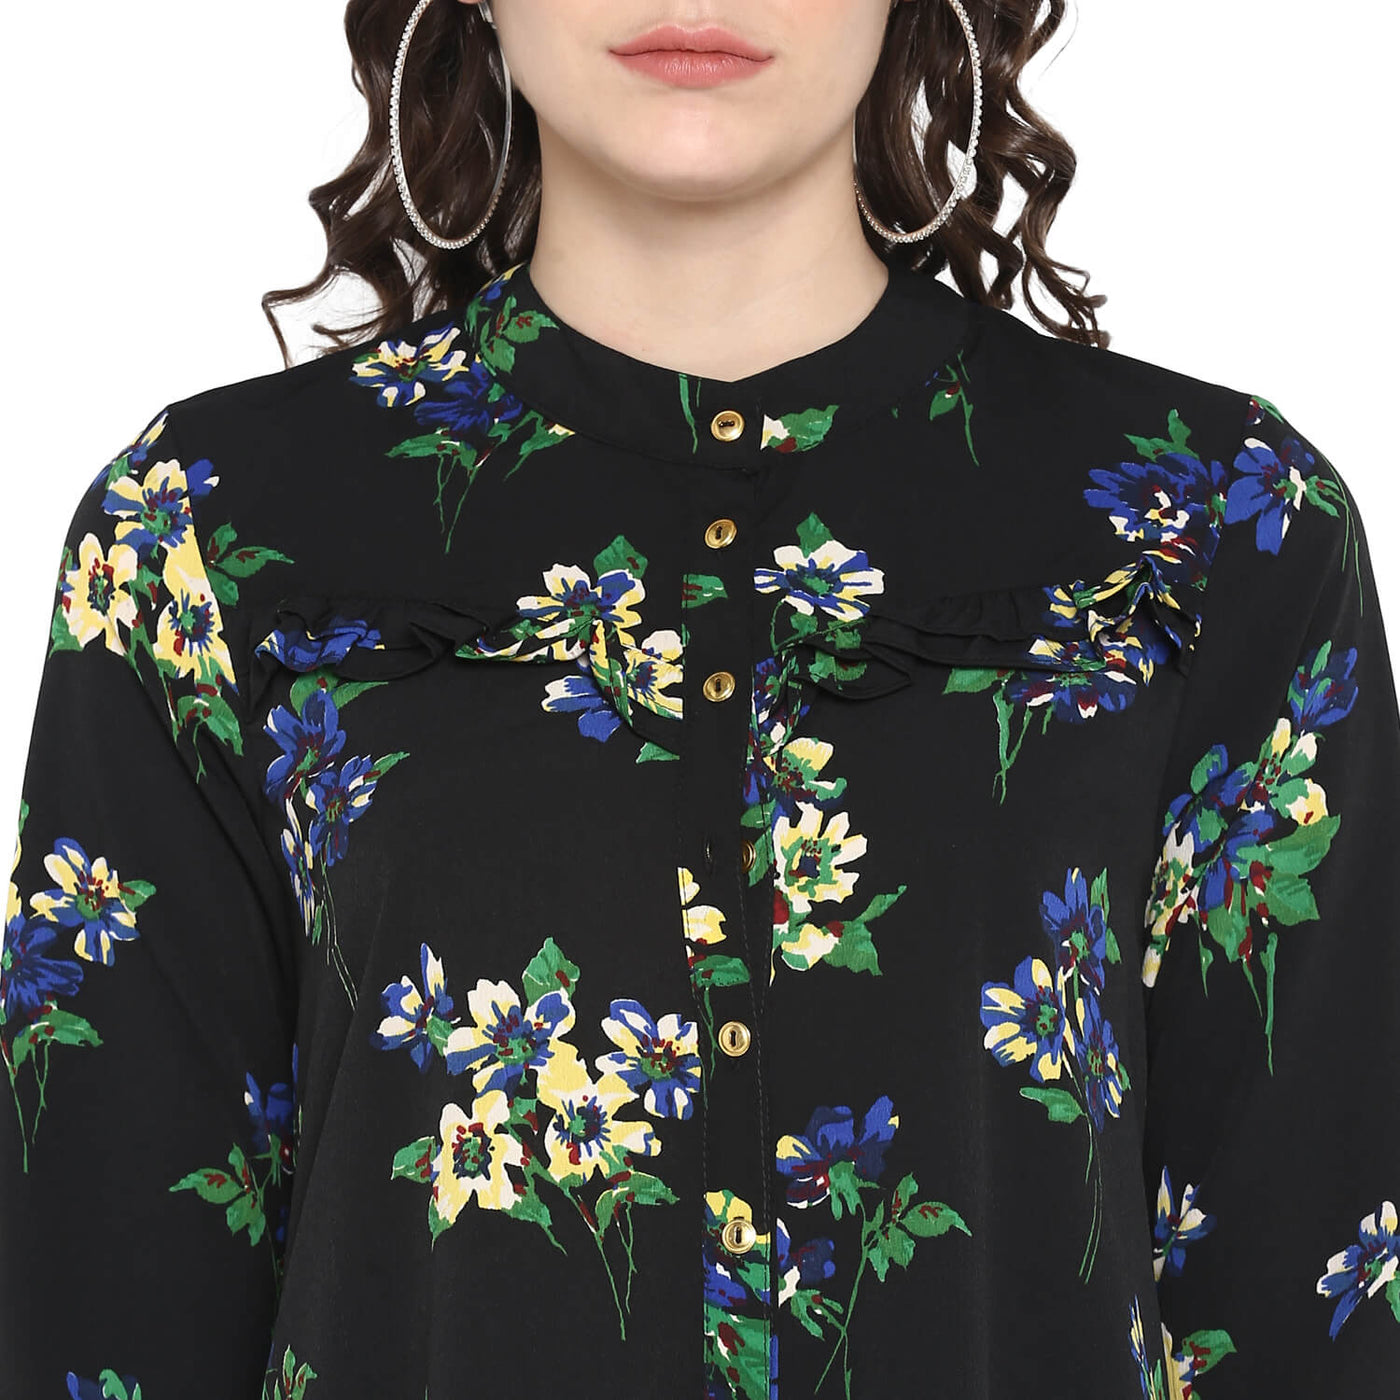 Women'S Printed Shirt Dress With Front Buttons